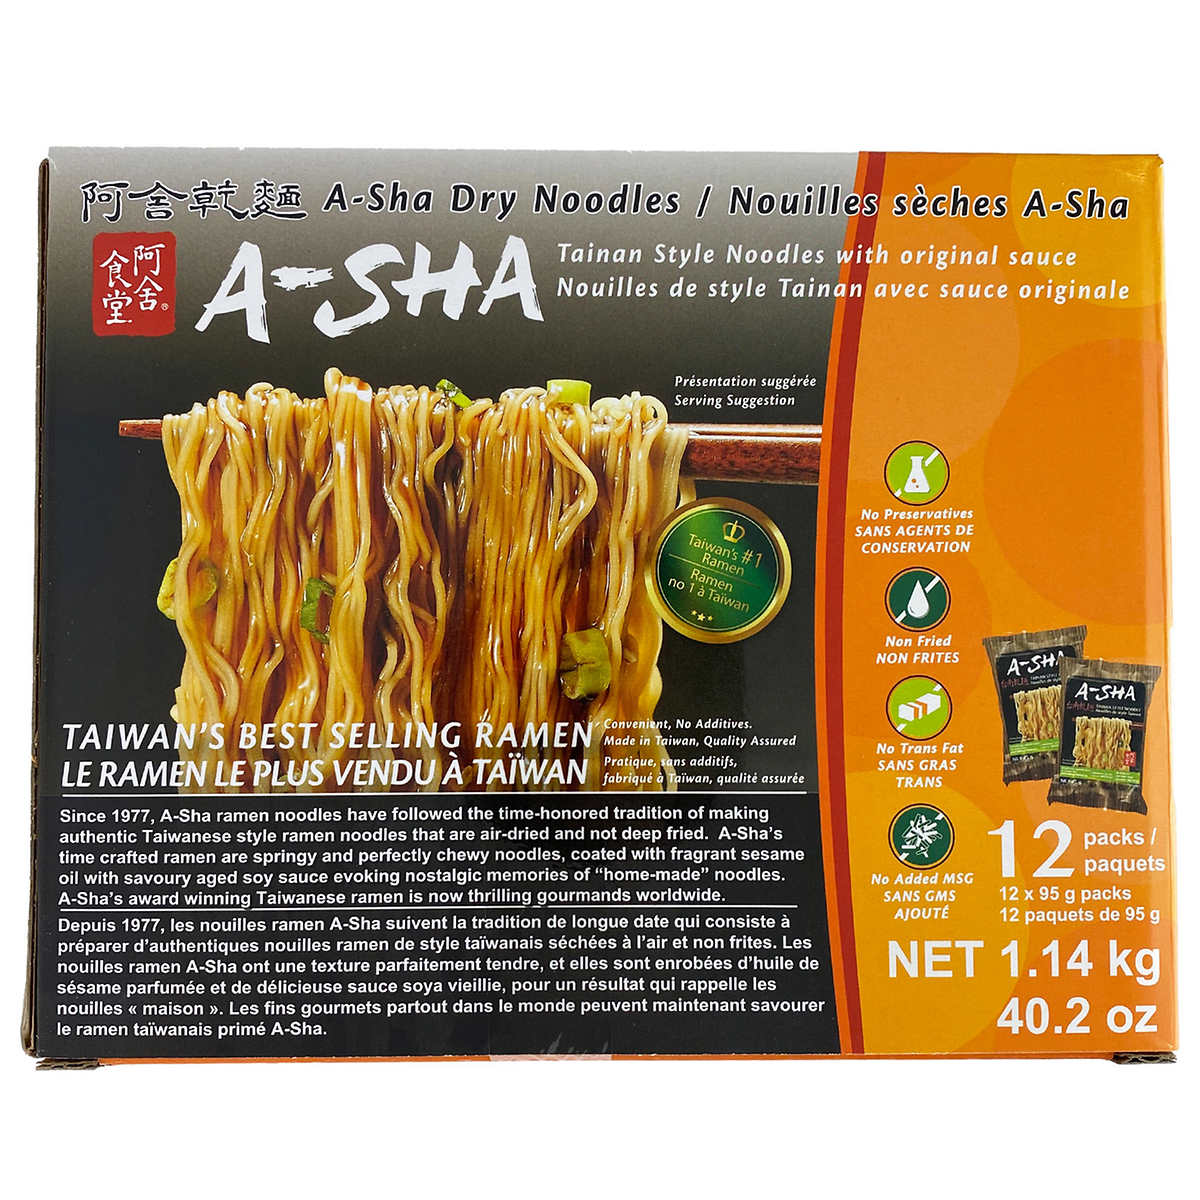 Healthy Noodles Costco Canada - Is it true that costco in south florida will start carrying the ...